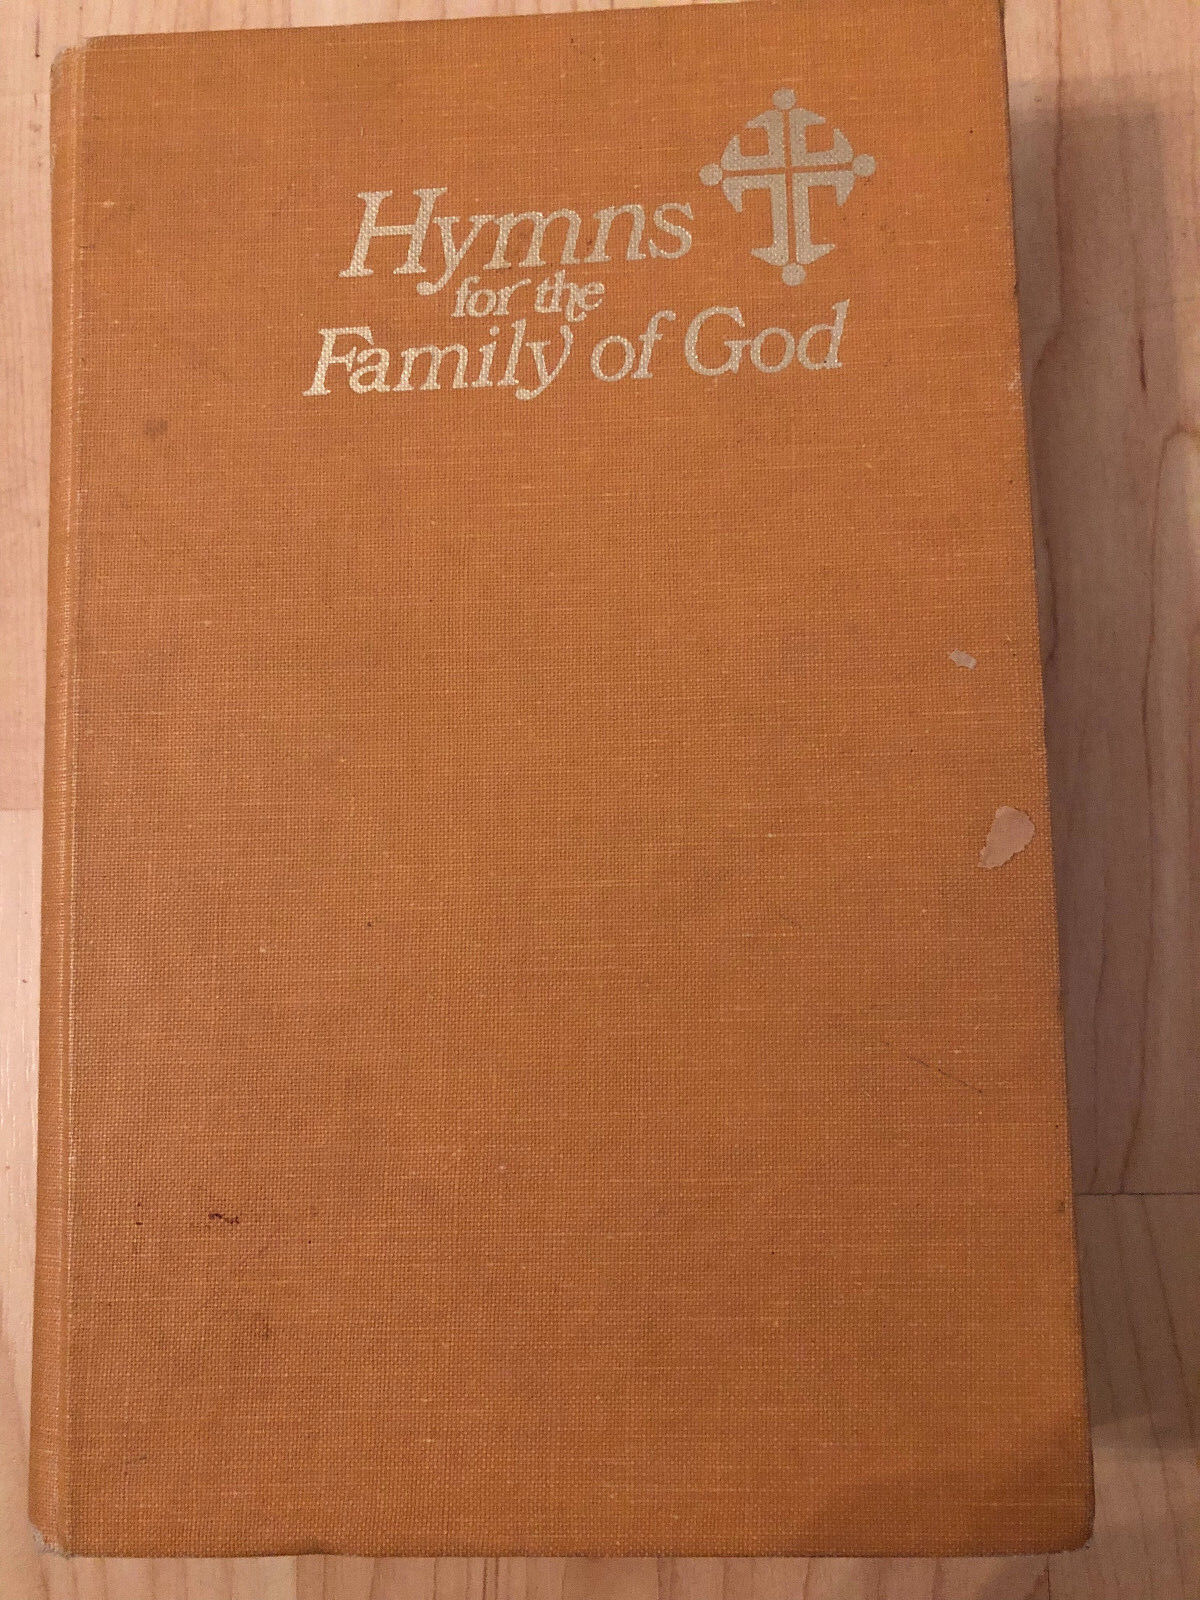 Hymns for the Family of God Hardcover